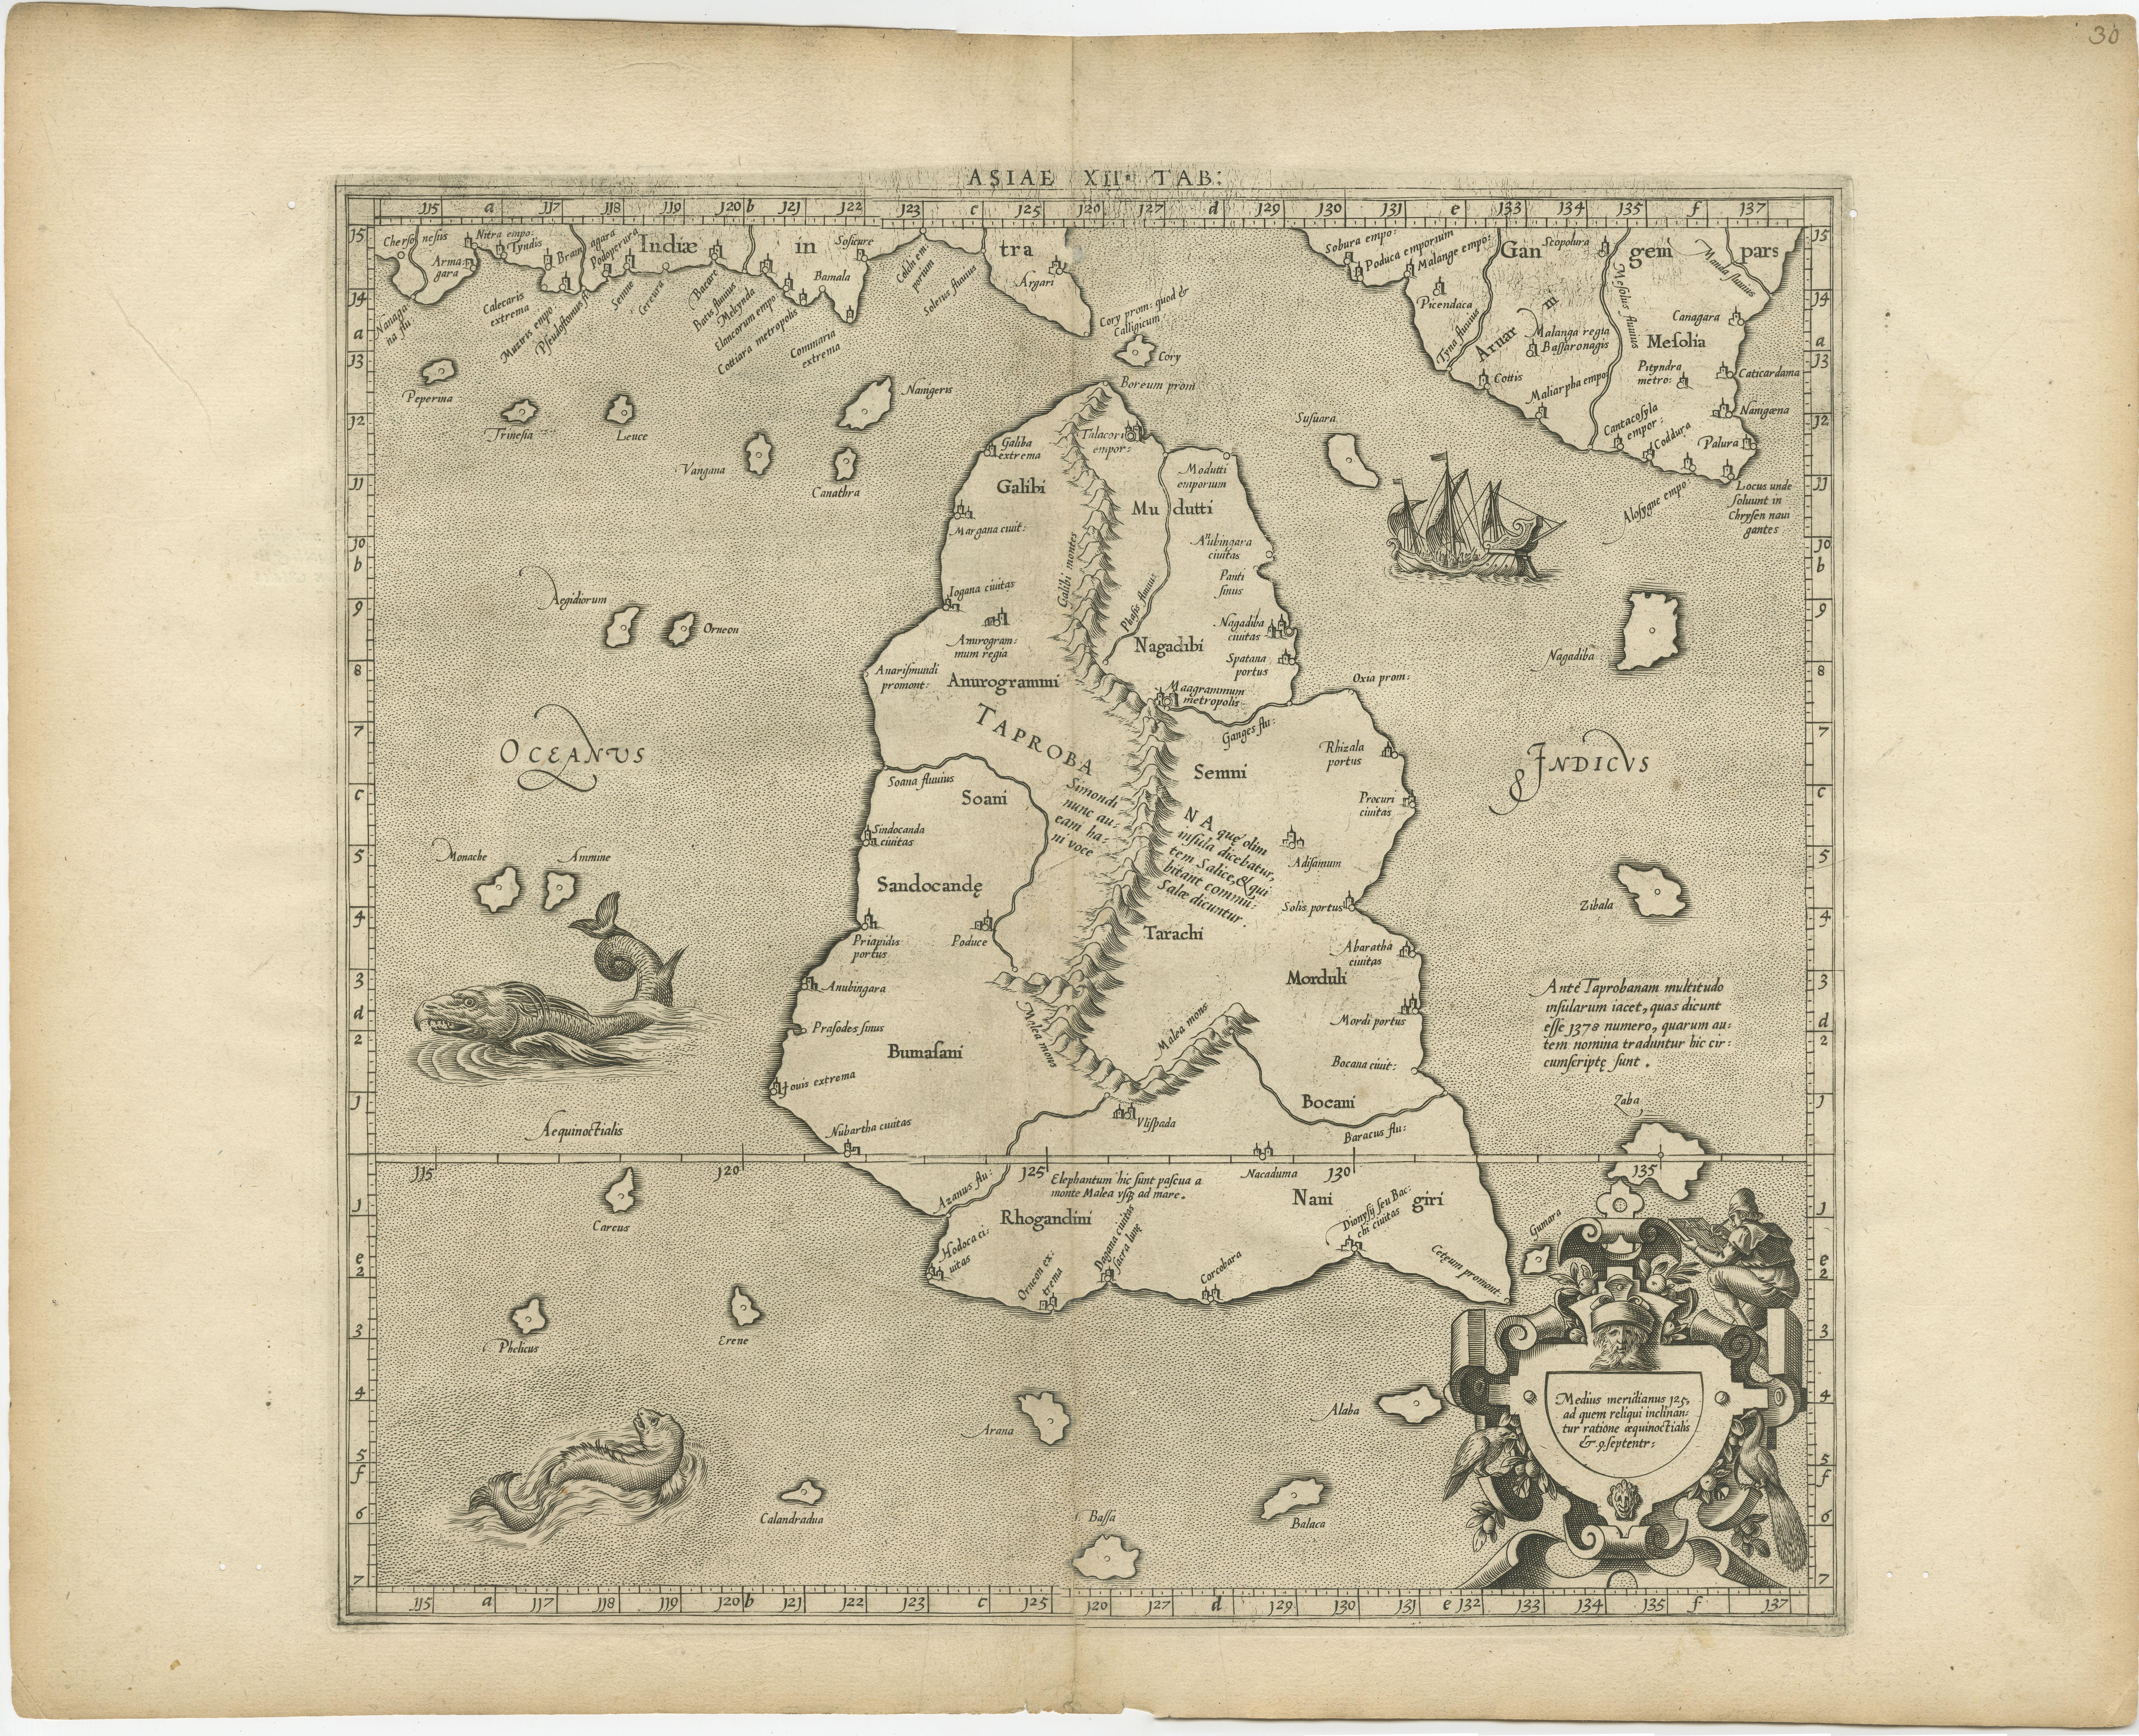 Antique map titled 'Asiae XII Tab'. Mercator's Ptolemaic map of Taprobana. The map shows Ptolemy's erroneous location of the island of Sri Lanka near the equator, with a bit of India shown to the northeast. Includes a pair of sea monsters and a